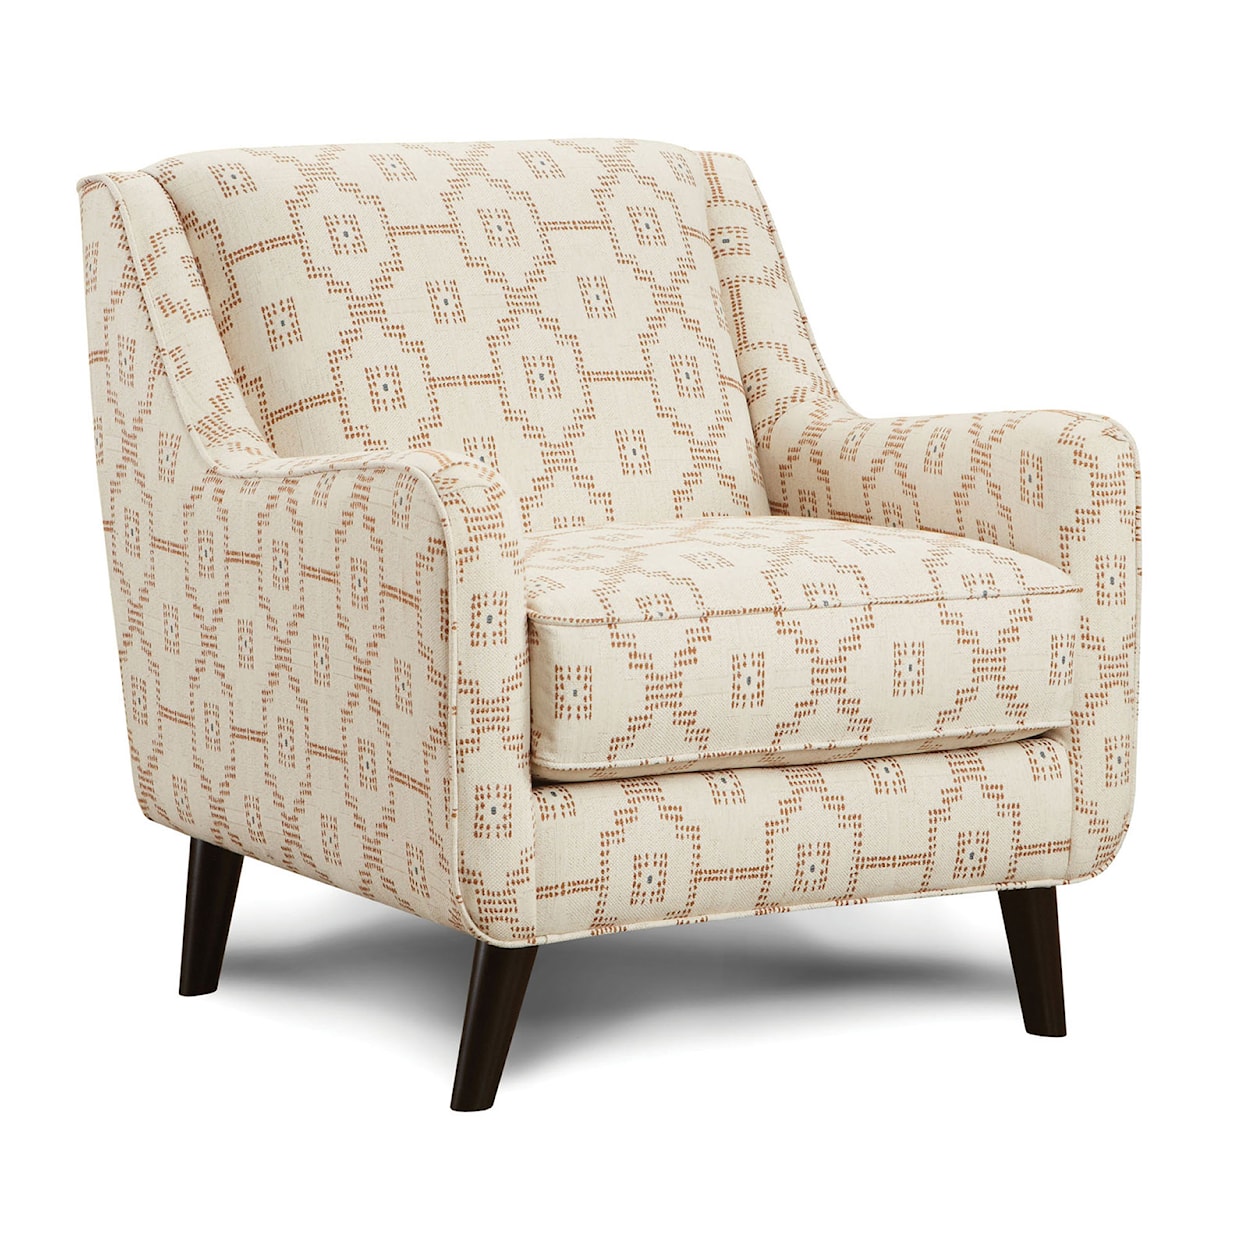 Furniture of America Eastleigh Accent Chair, Keystone